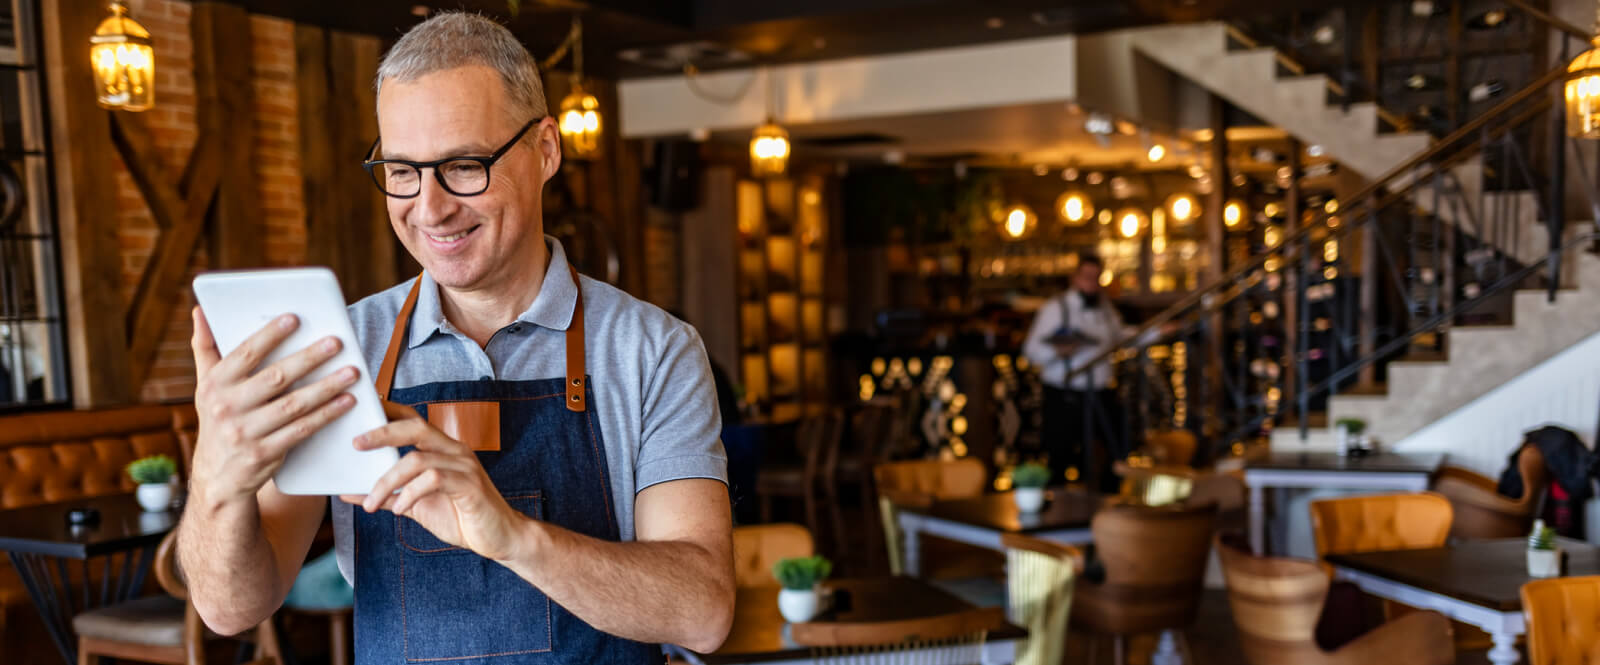 Man in apron standing in a cafe holding a tablet